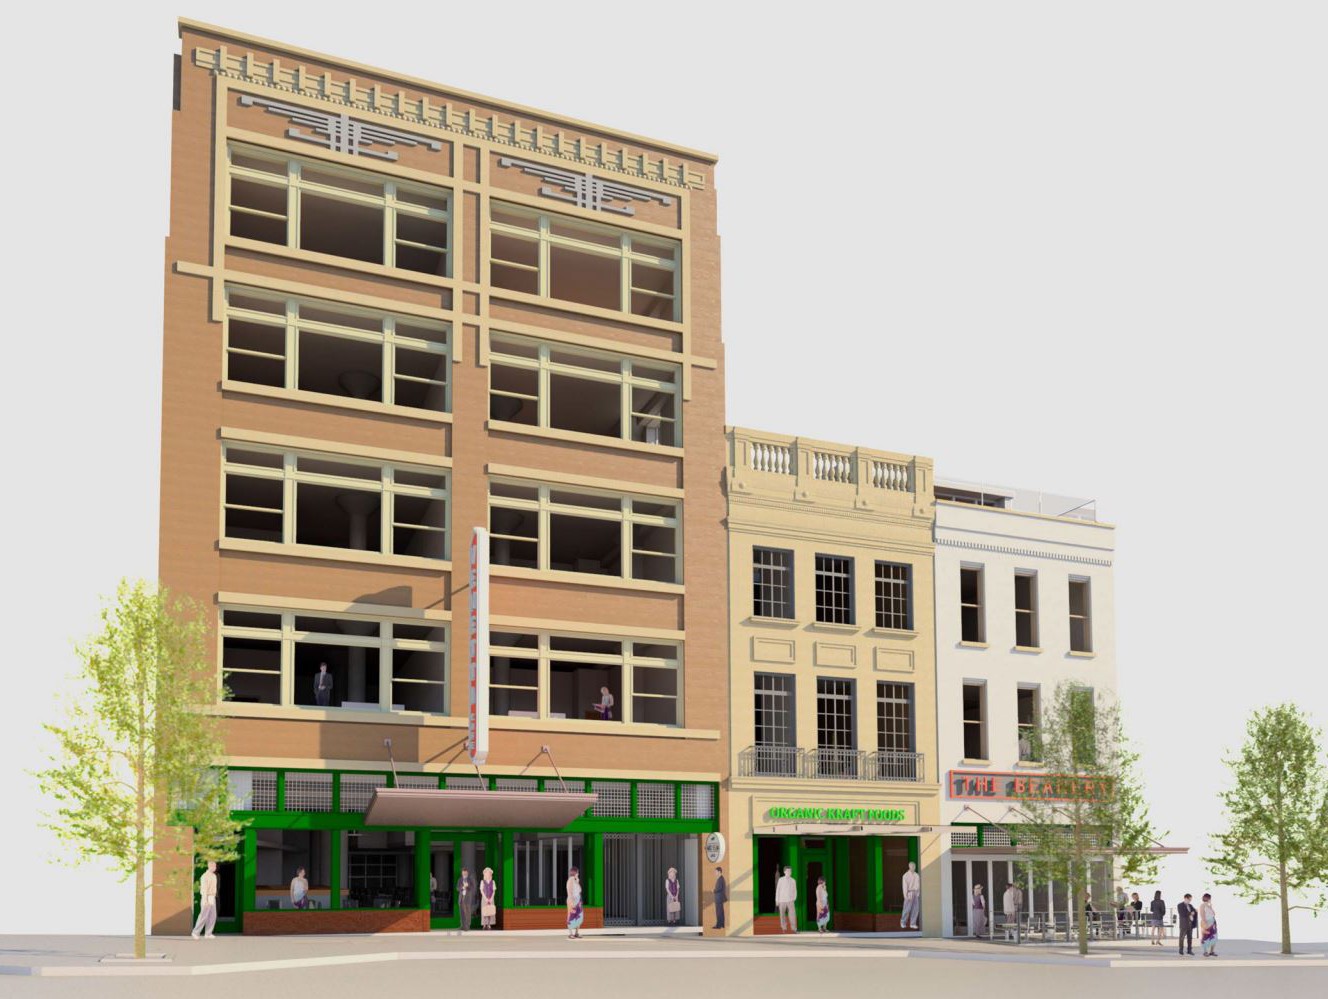 Rendering of the Mid Elm Lofts redevelopment project in Dallas